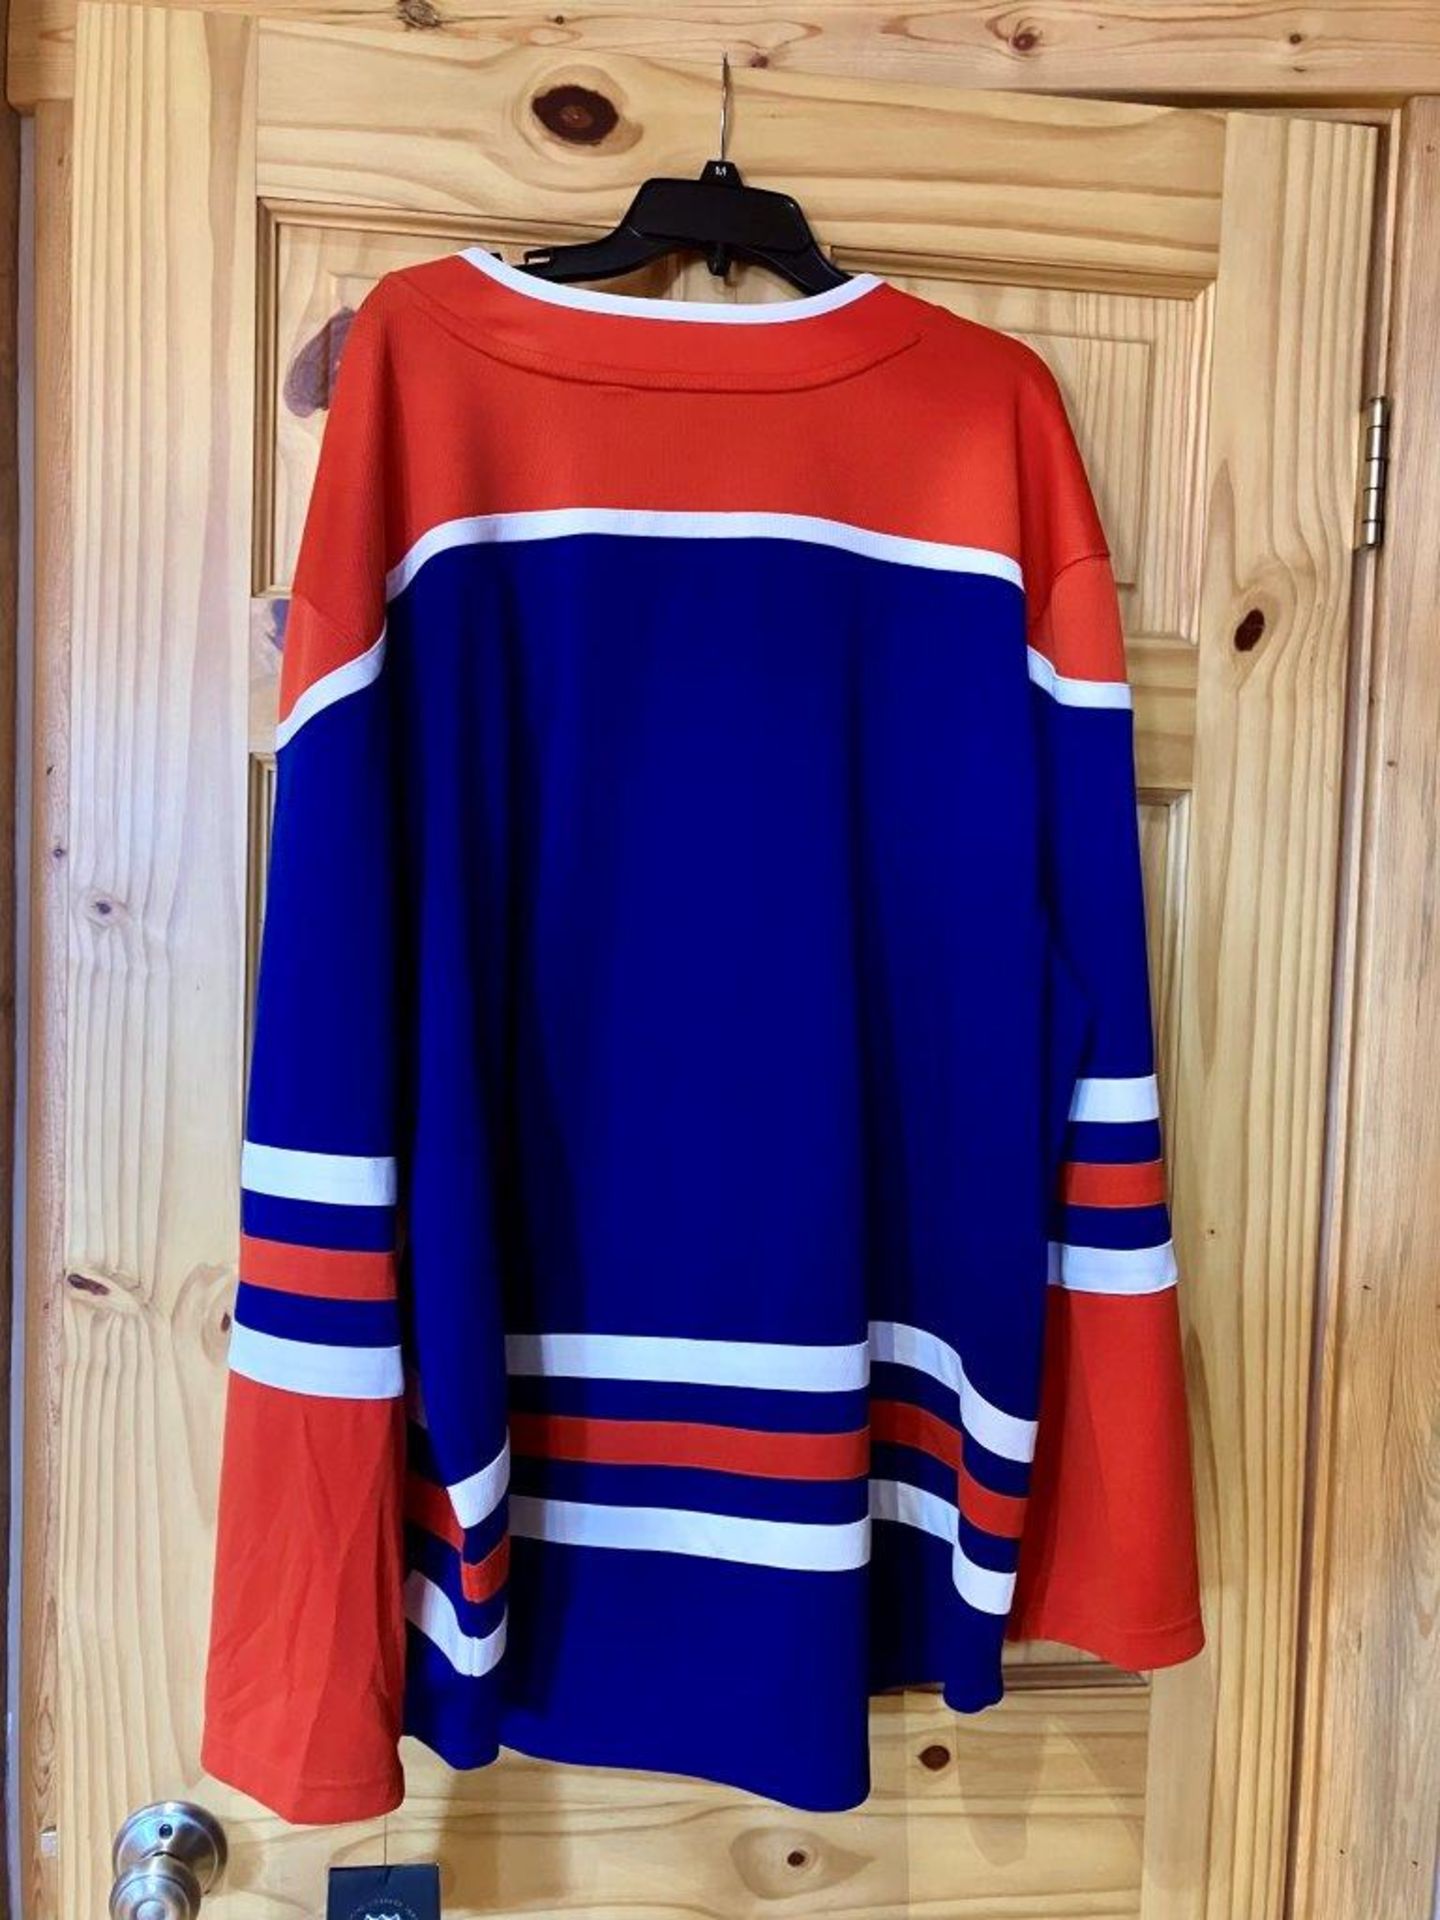 OILERS 2XL JERSEY - Image 2 of 3